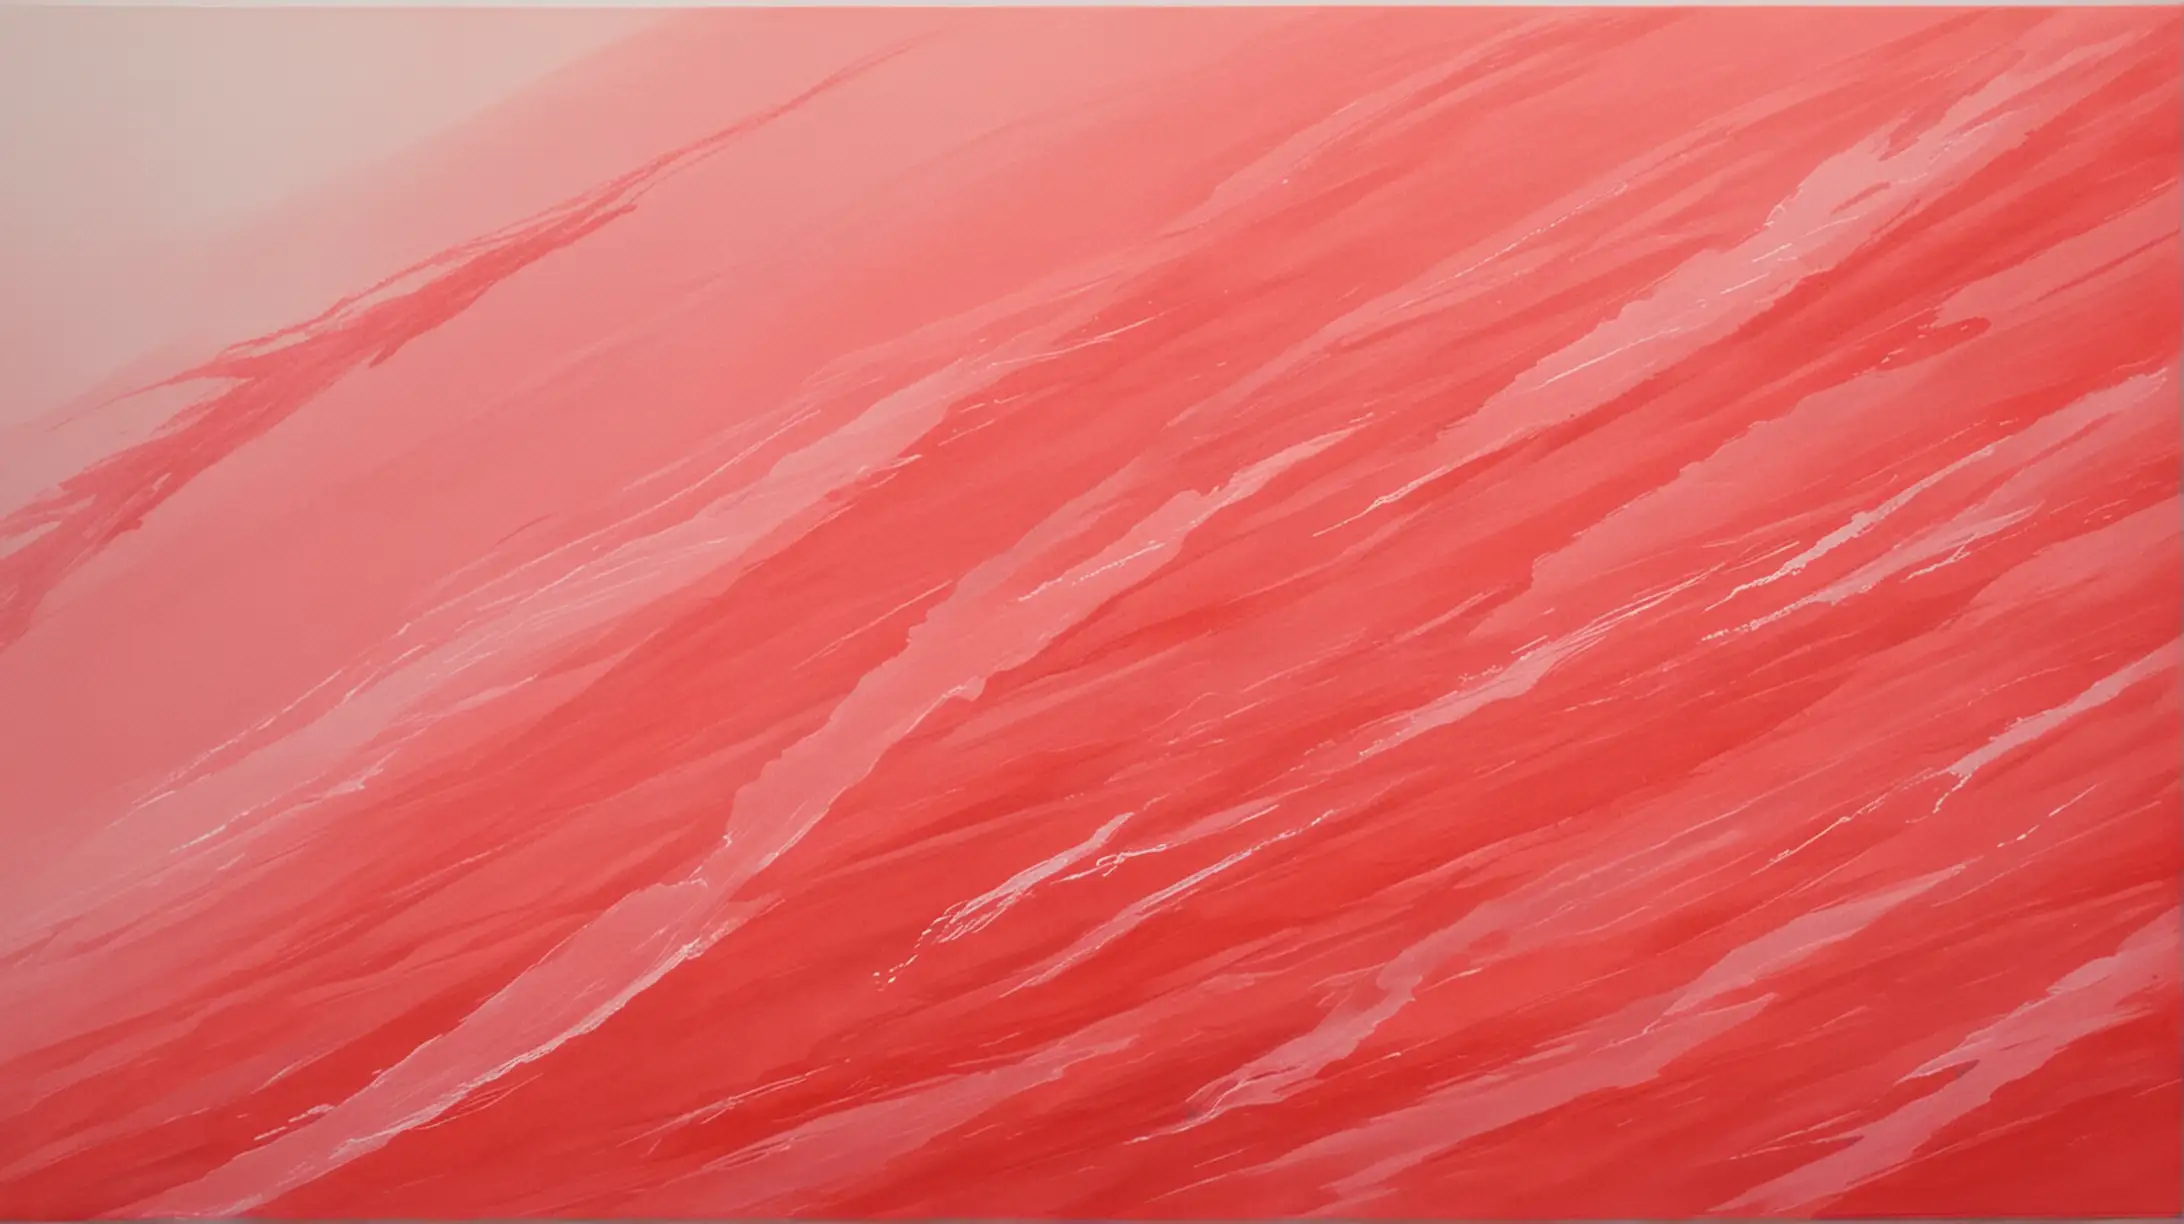 Dynamic Wind Blowing Over Red Gradient Landscape Aerial Gouache Painting